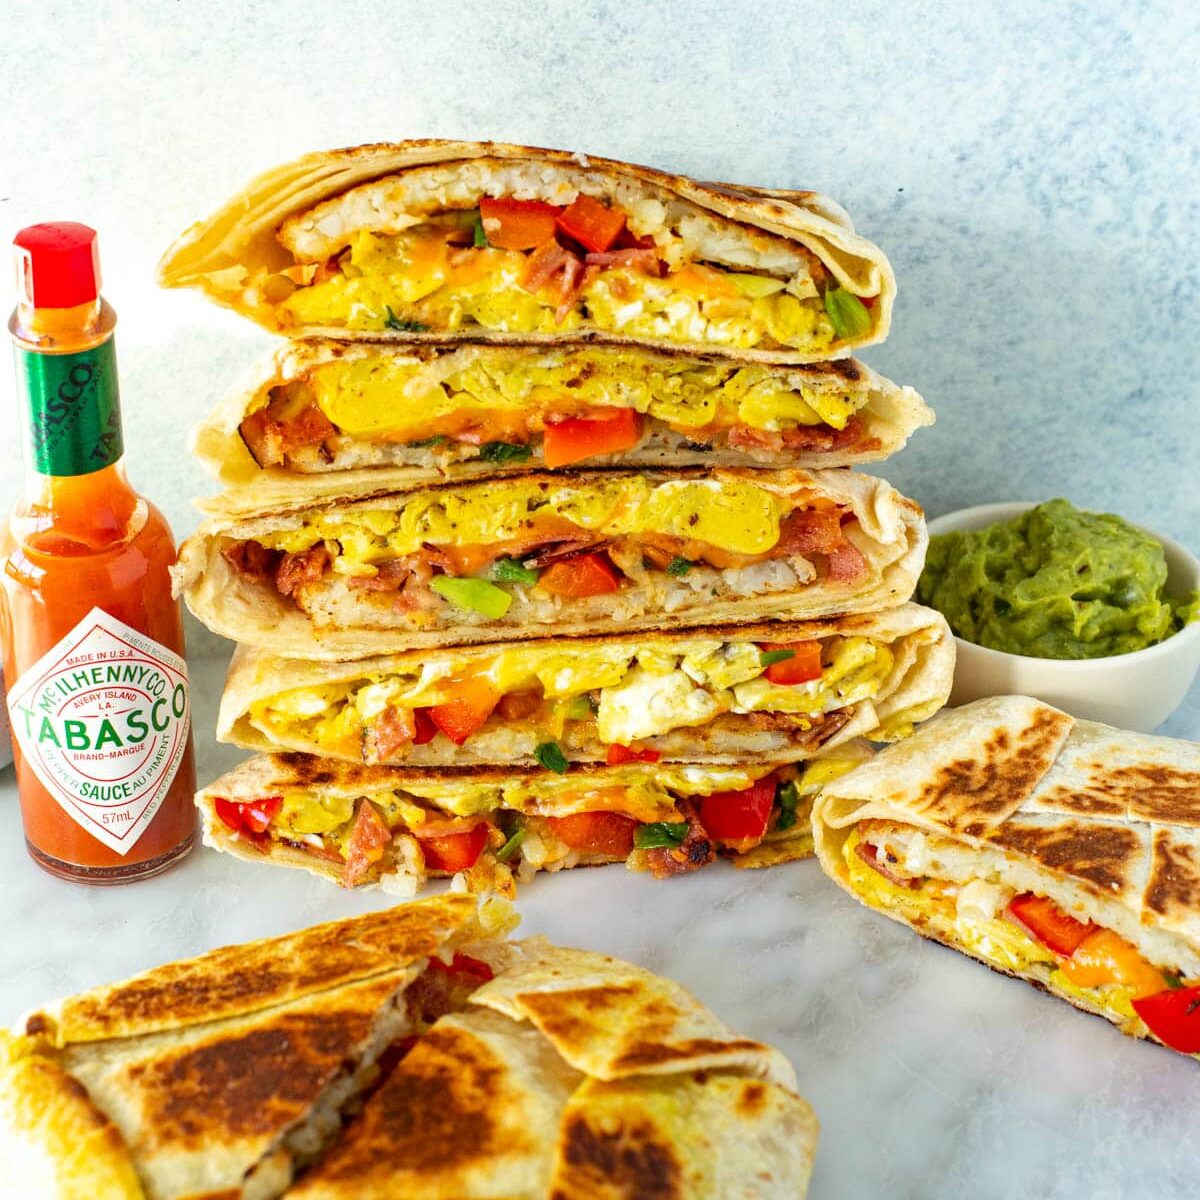 Cut open breakfast crunchwraps stacked together with a side of hot sauce and guacamole.